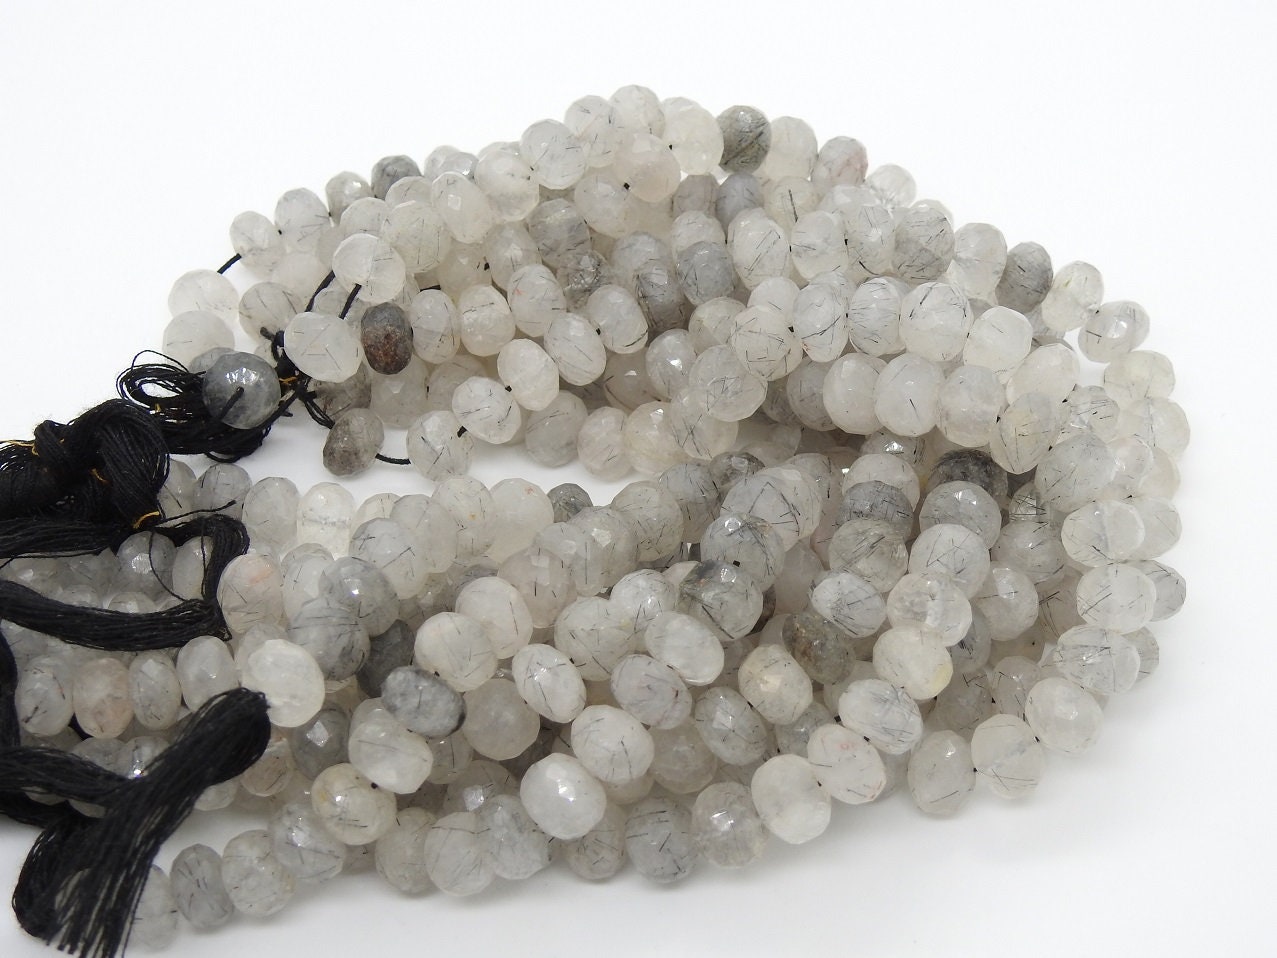 Black Rutile Quartz Faceted Roundel Beads,Loose Stone,Handmade,For Making Jewelry,10Inchs Strand 8MM Approx,Wholesaler,Supplies PME-B3 | Save 33% - Rajasthan Living 11